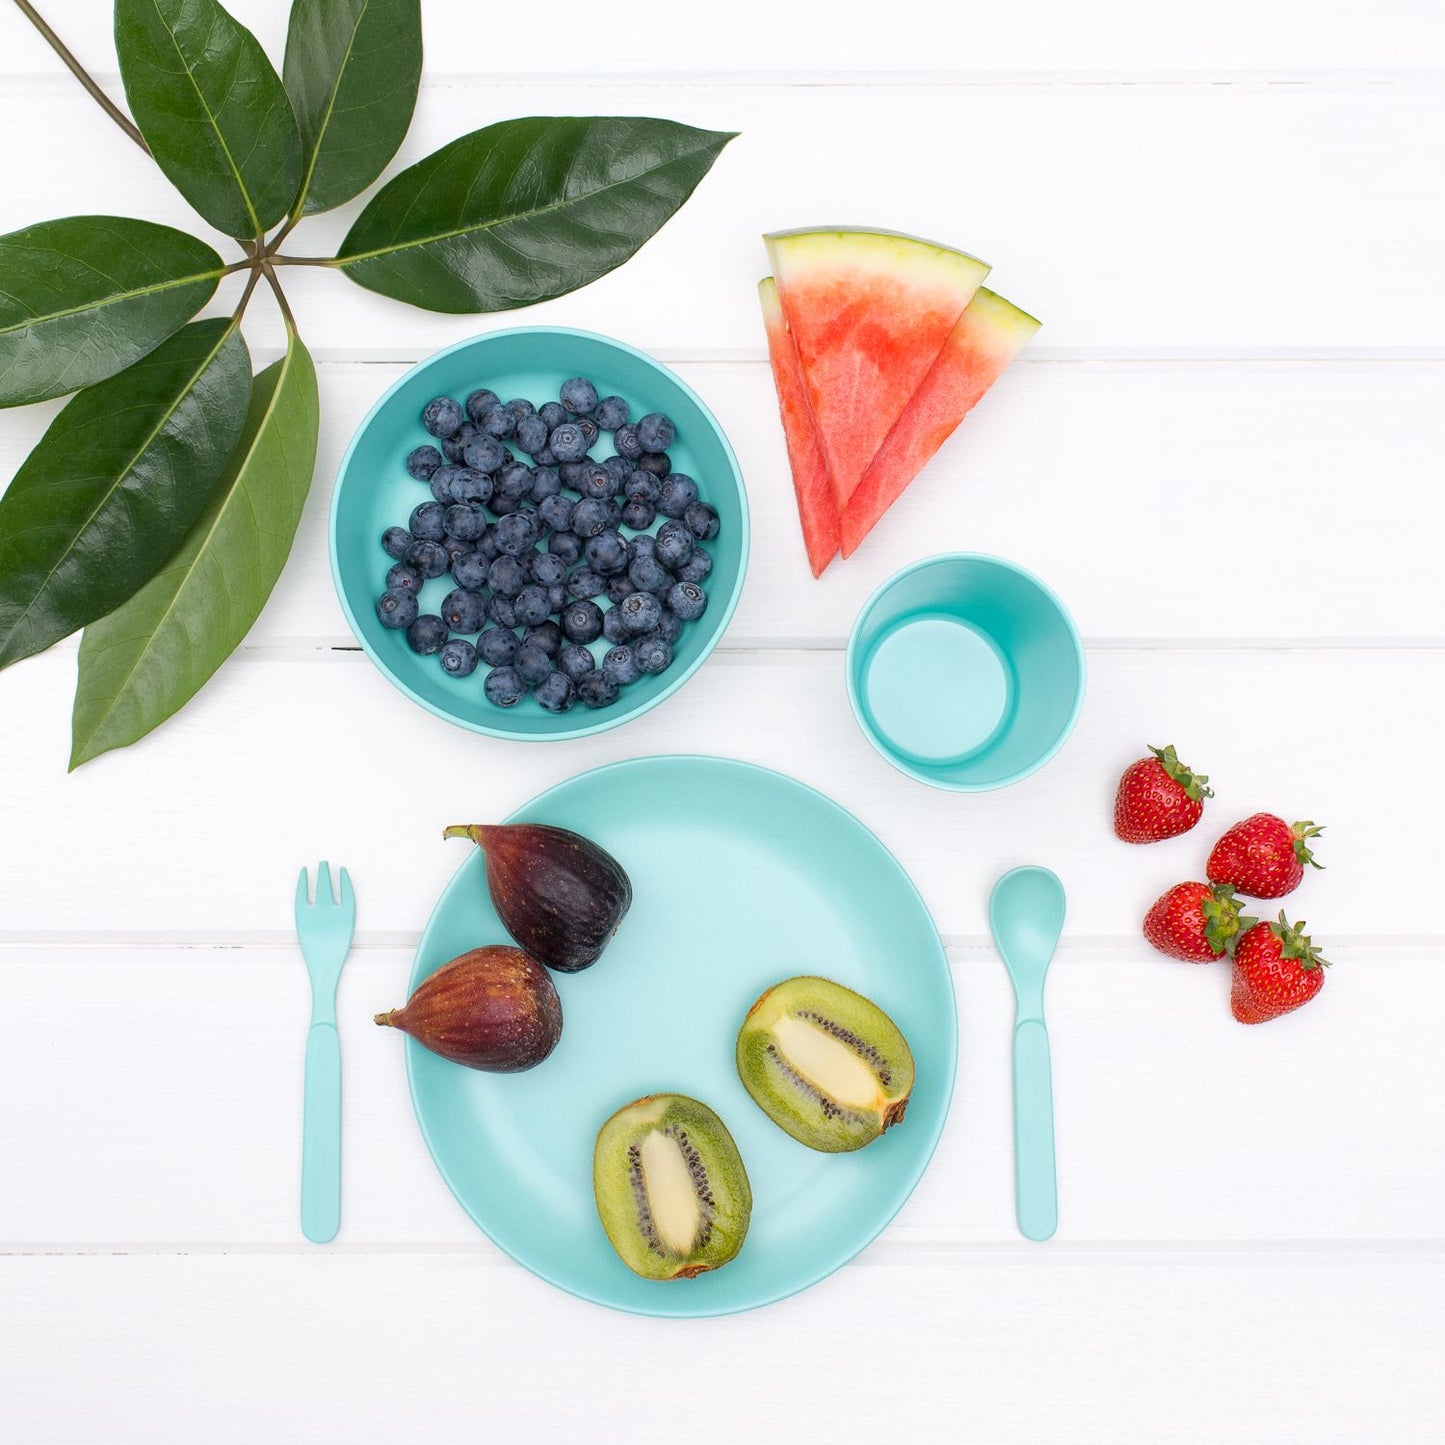 Bobo & Boo's mint Bamboo Dinnerware Set, showcasing a stylish and eco-friendly dining arrangement. The non-toxic bamboo dinnerware adds a touch of elegance to the table, emphasising sustainability